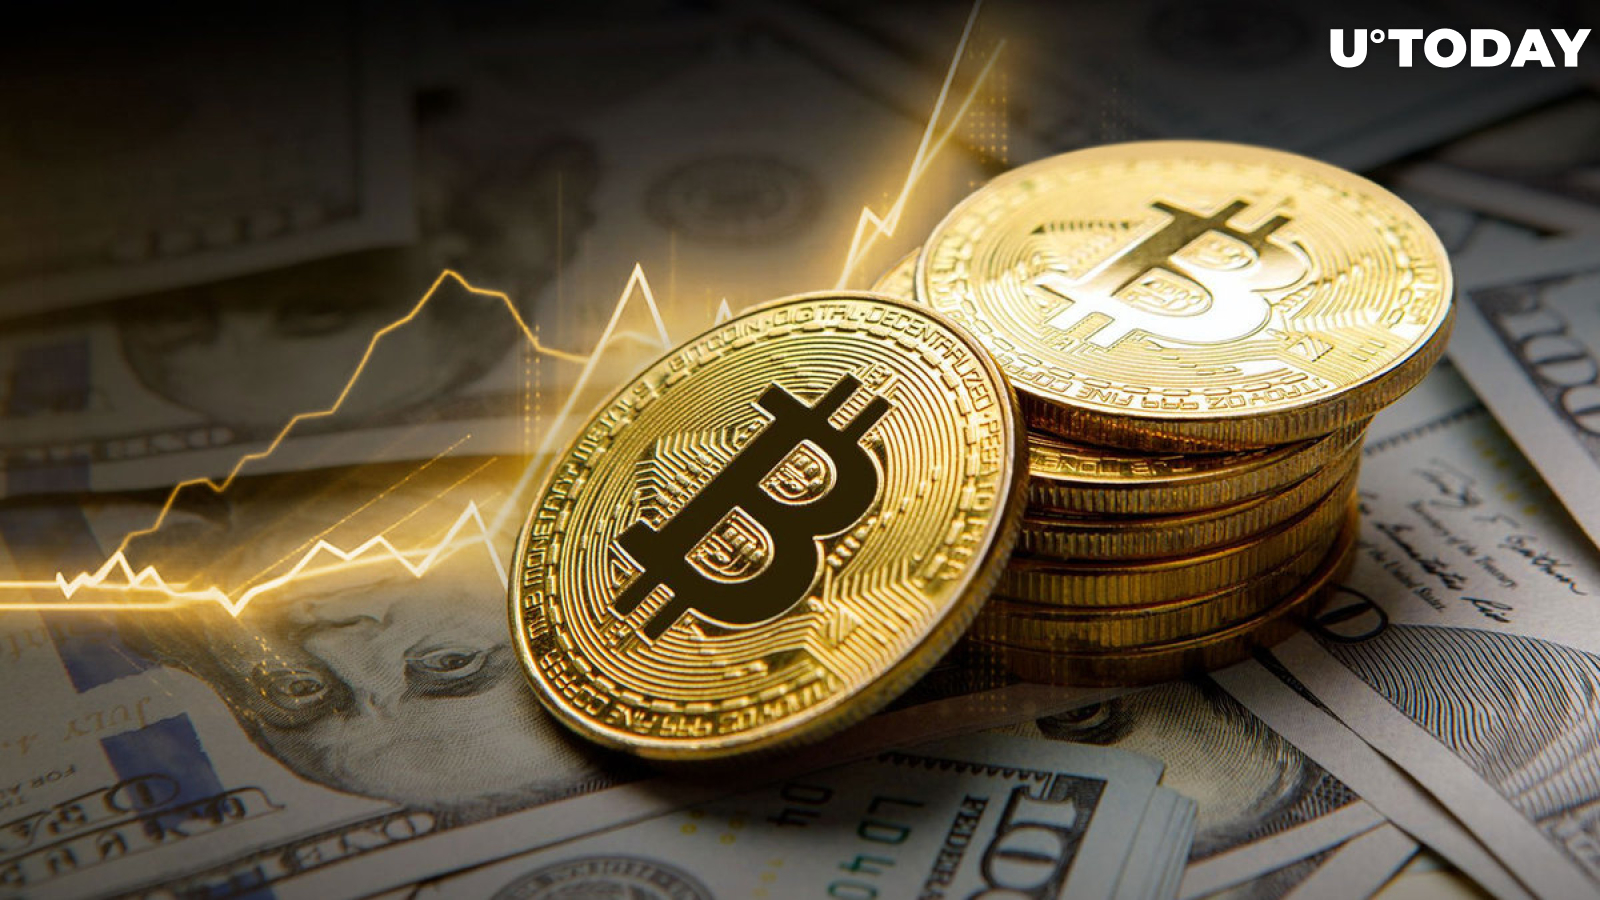 Bitcoin (BTC) Price Can Break Above $220,000 Over Next 18 Months: Report